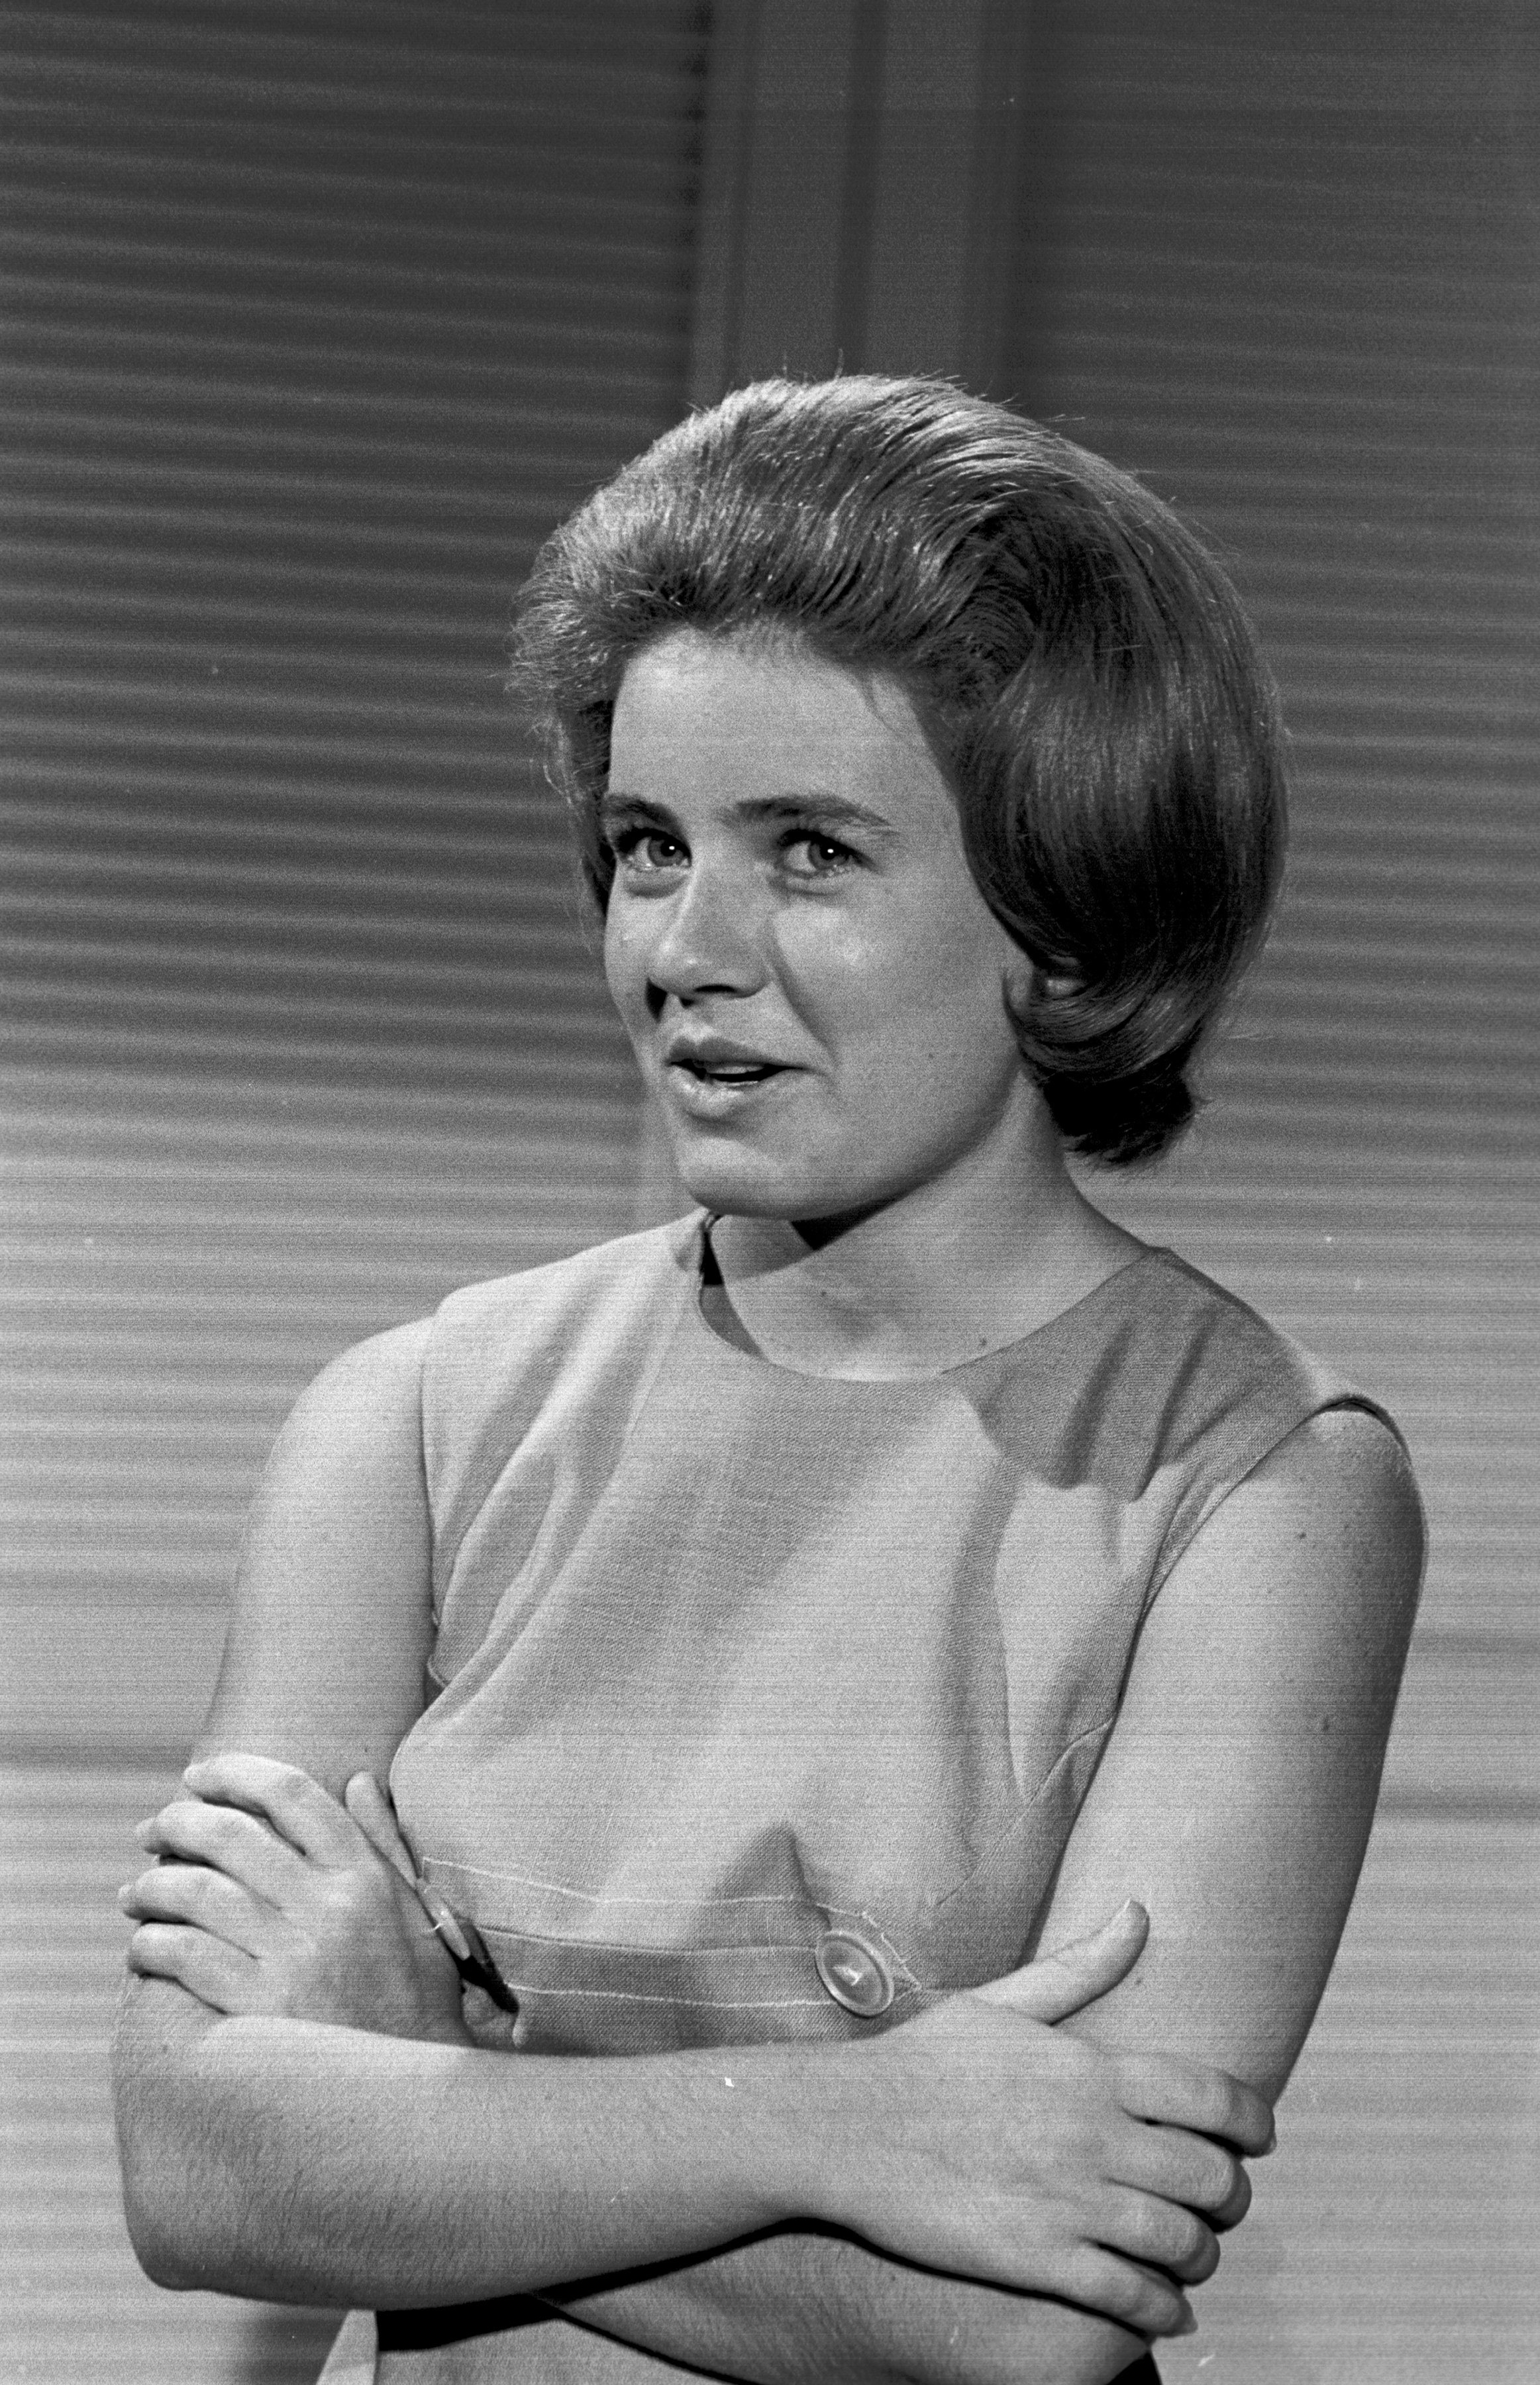 Actress Patty Duke on the "Operation Tonsils" episode of "The Patty Duke Show" aired on September 22, 1965 | Source: Getty Images